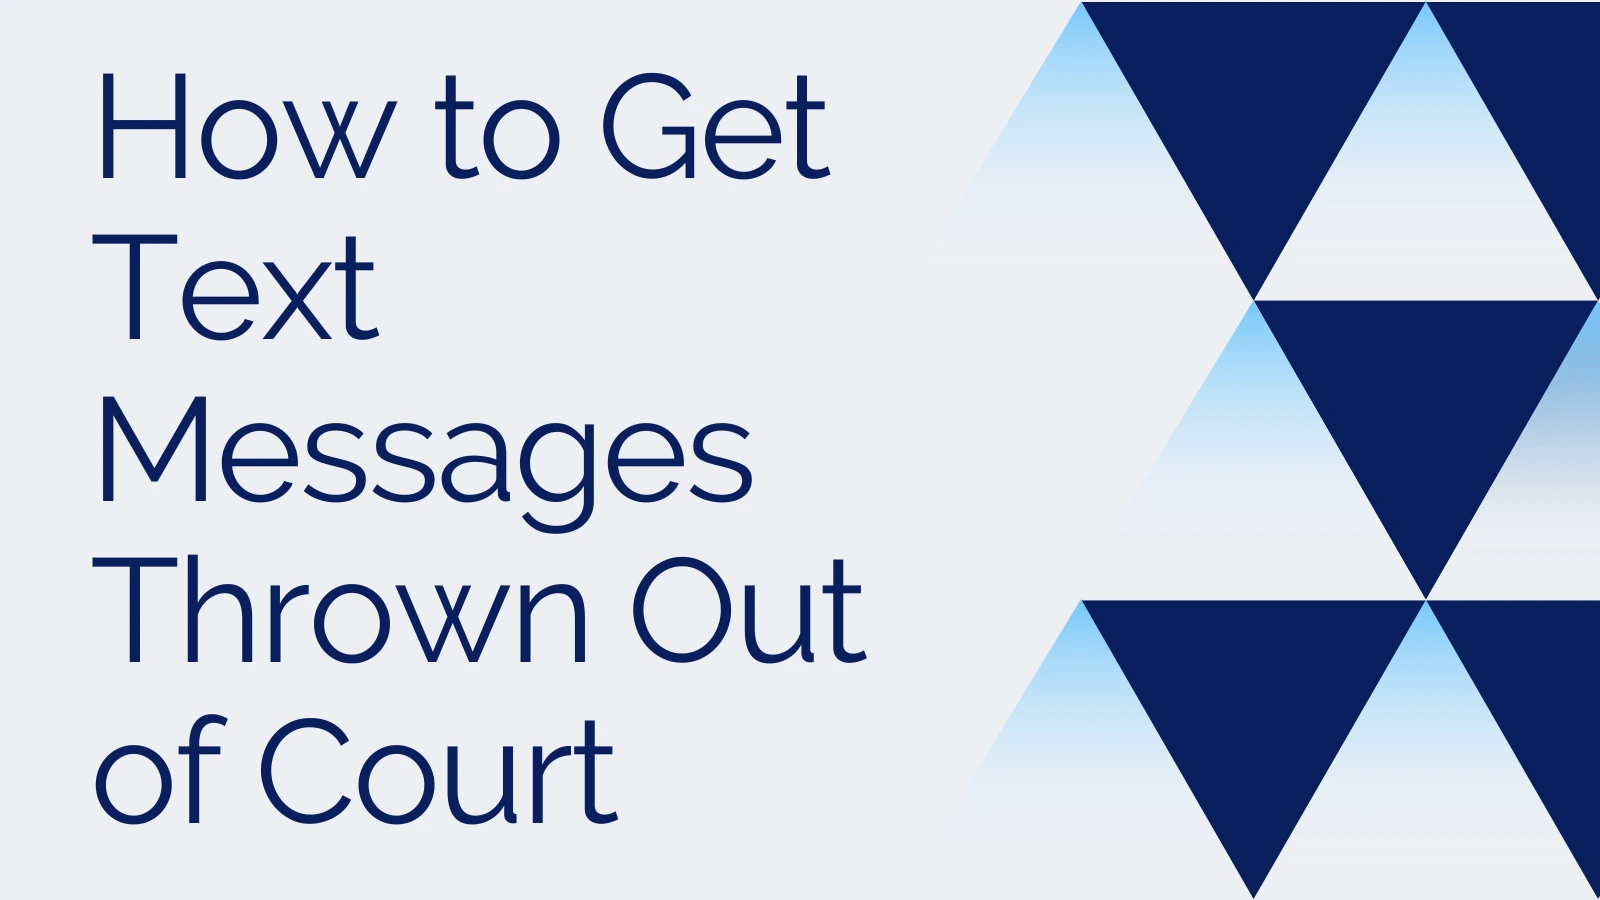 How to Get Text Messages Thrown Out of Court